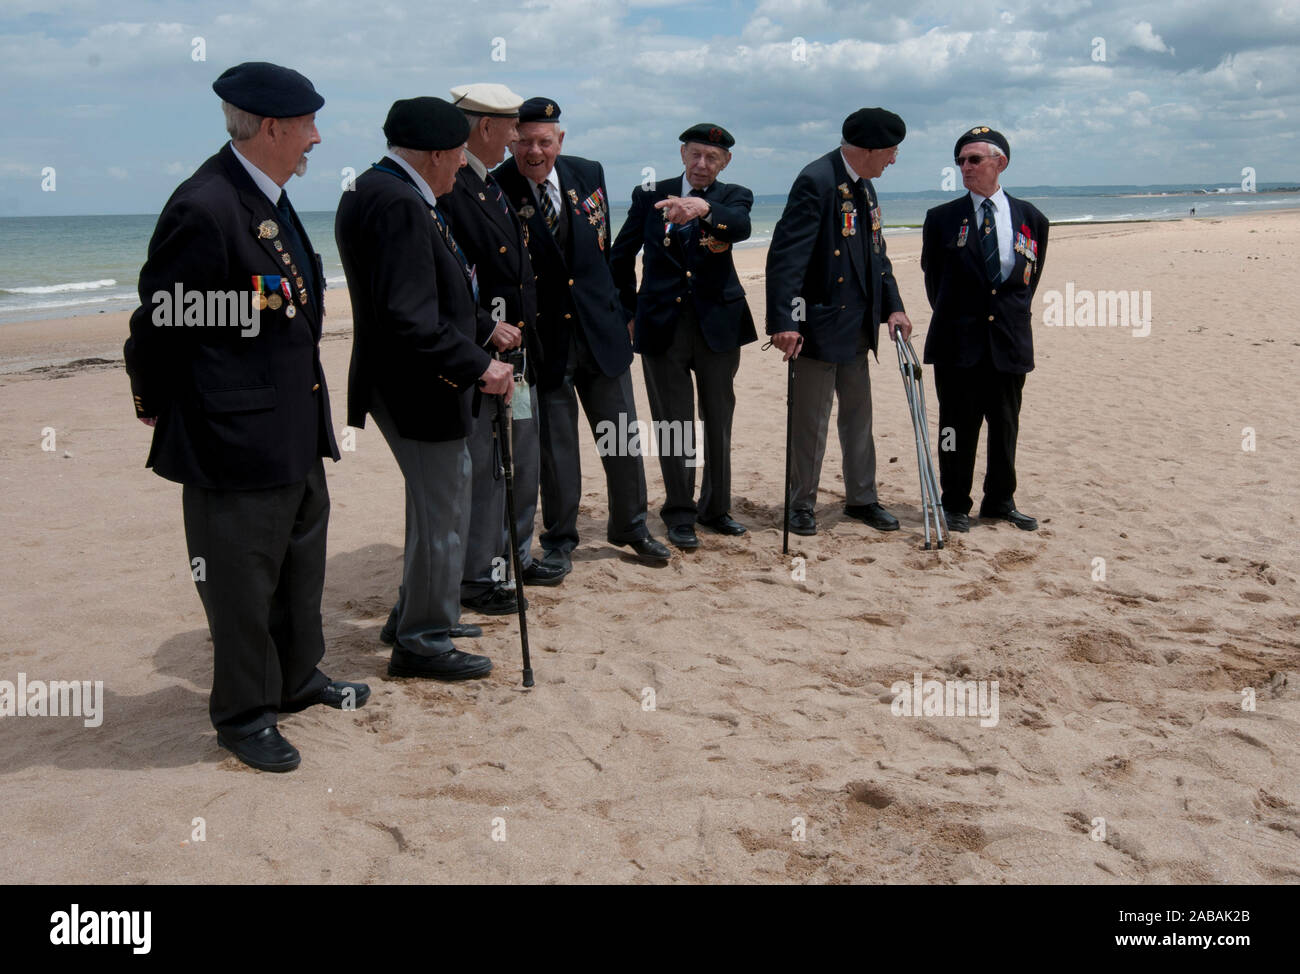 Members of the Wiltshire  Normandy 'Gunner' Veterans  association on Sword beach, Hermanville Sur Mer  in Normandy  ahead of the D-Day celebrations. Stock Photo